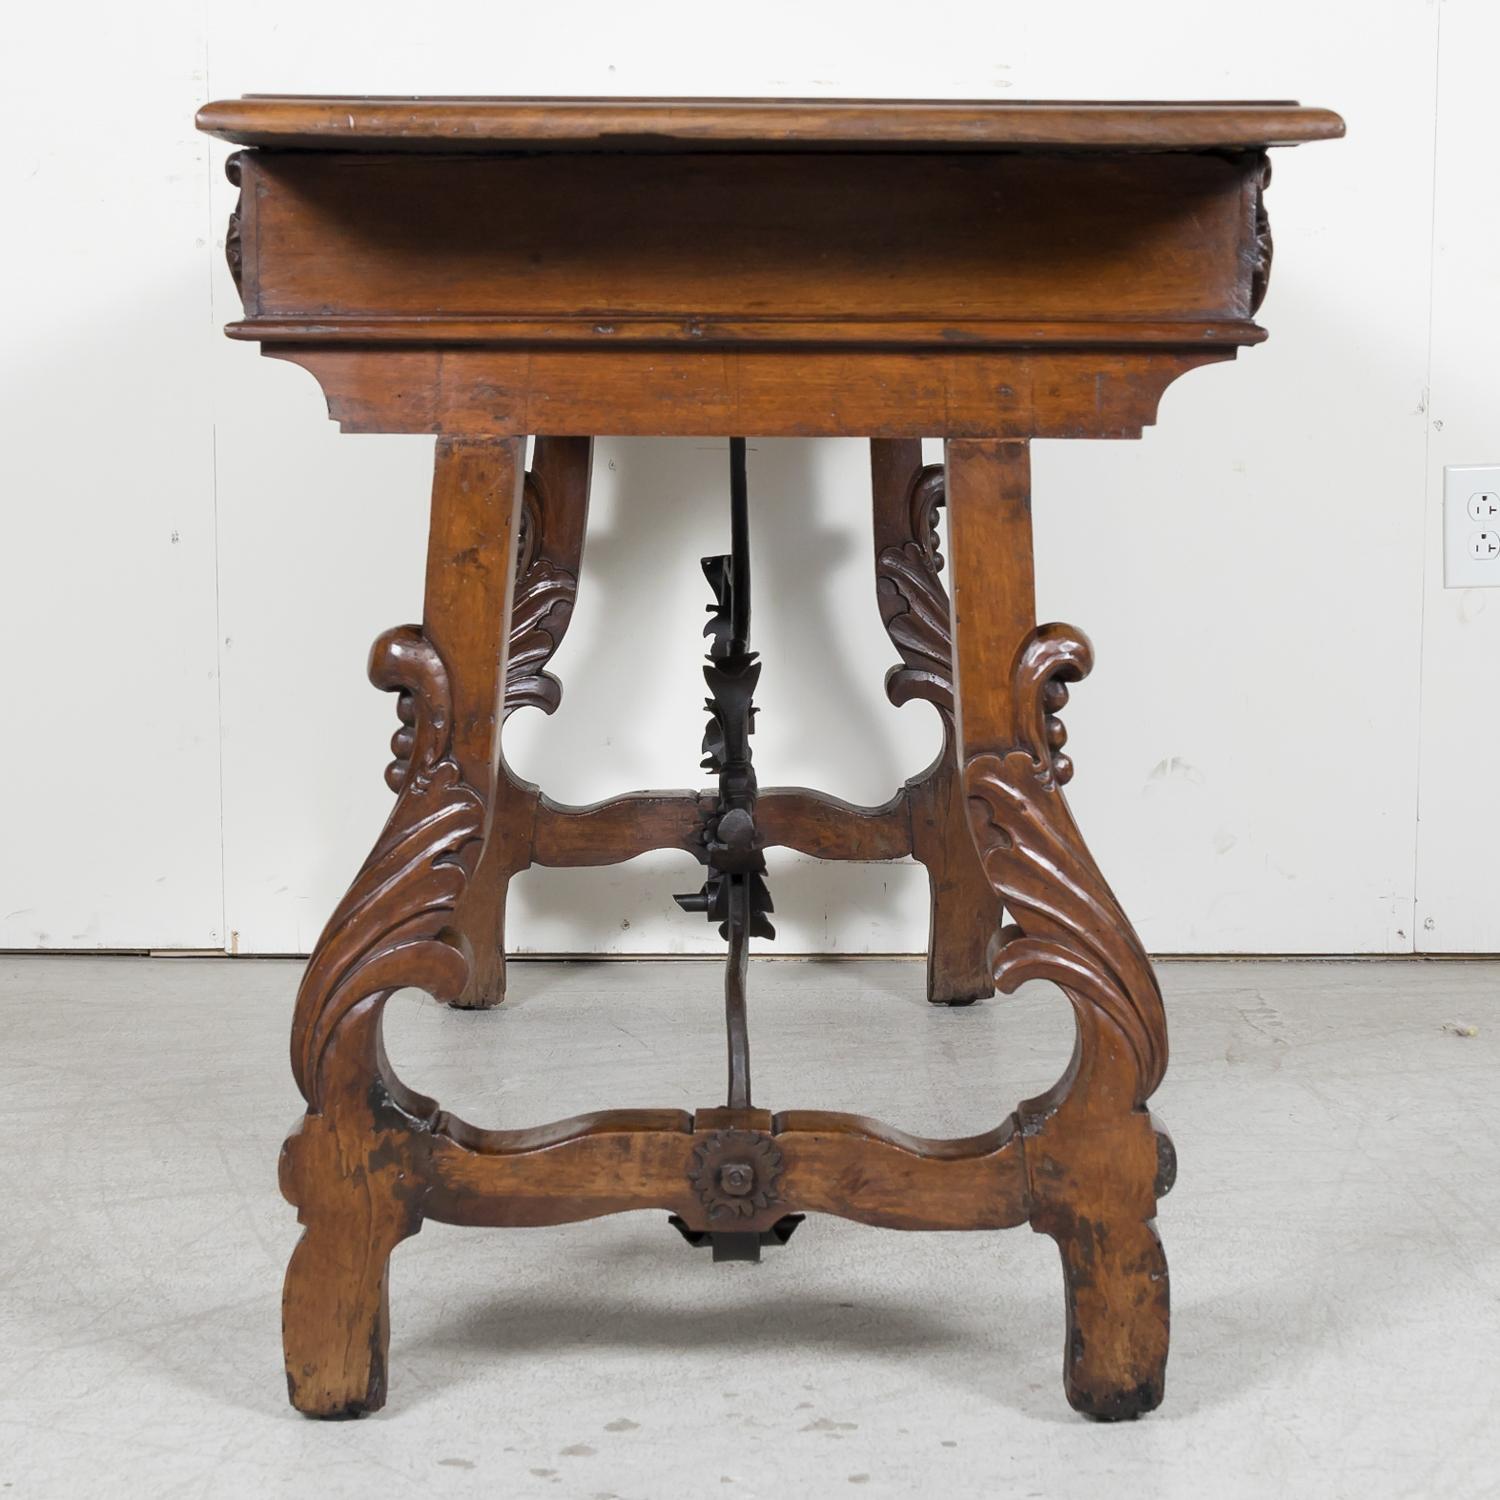 19th Century Italian Baroque Style Walnut Fratino Console Table with Drawers 11